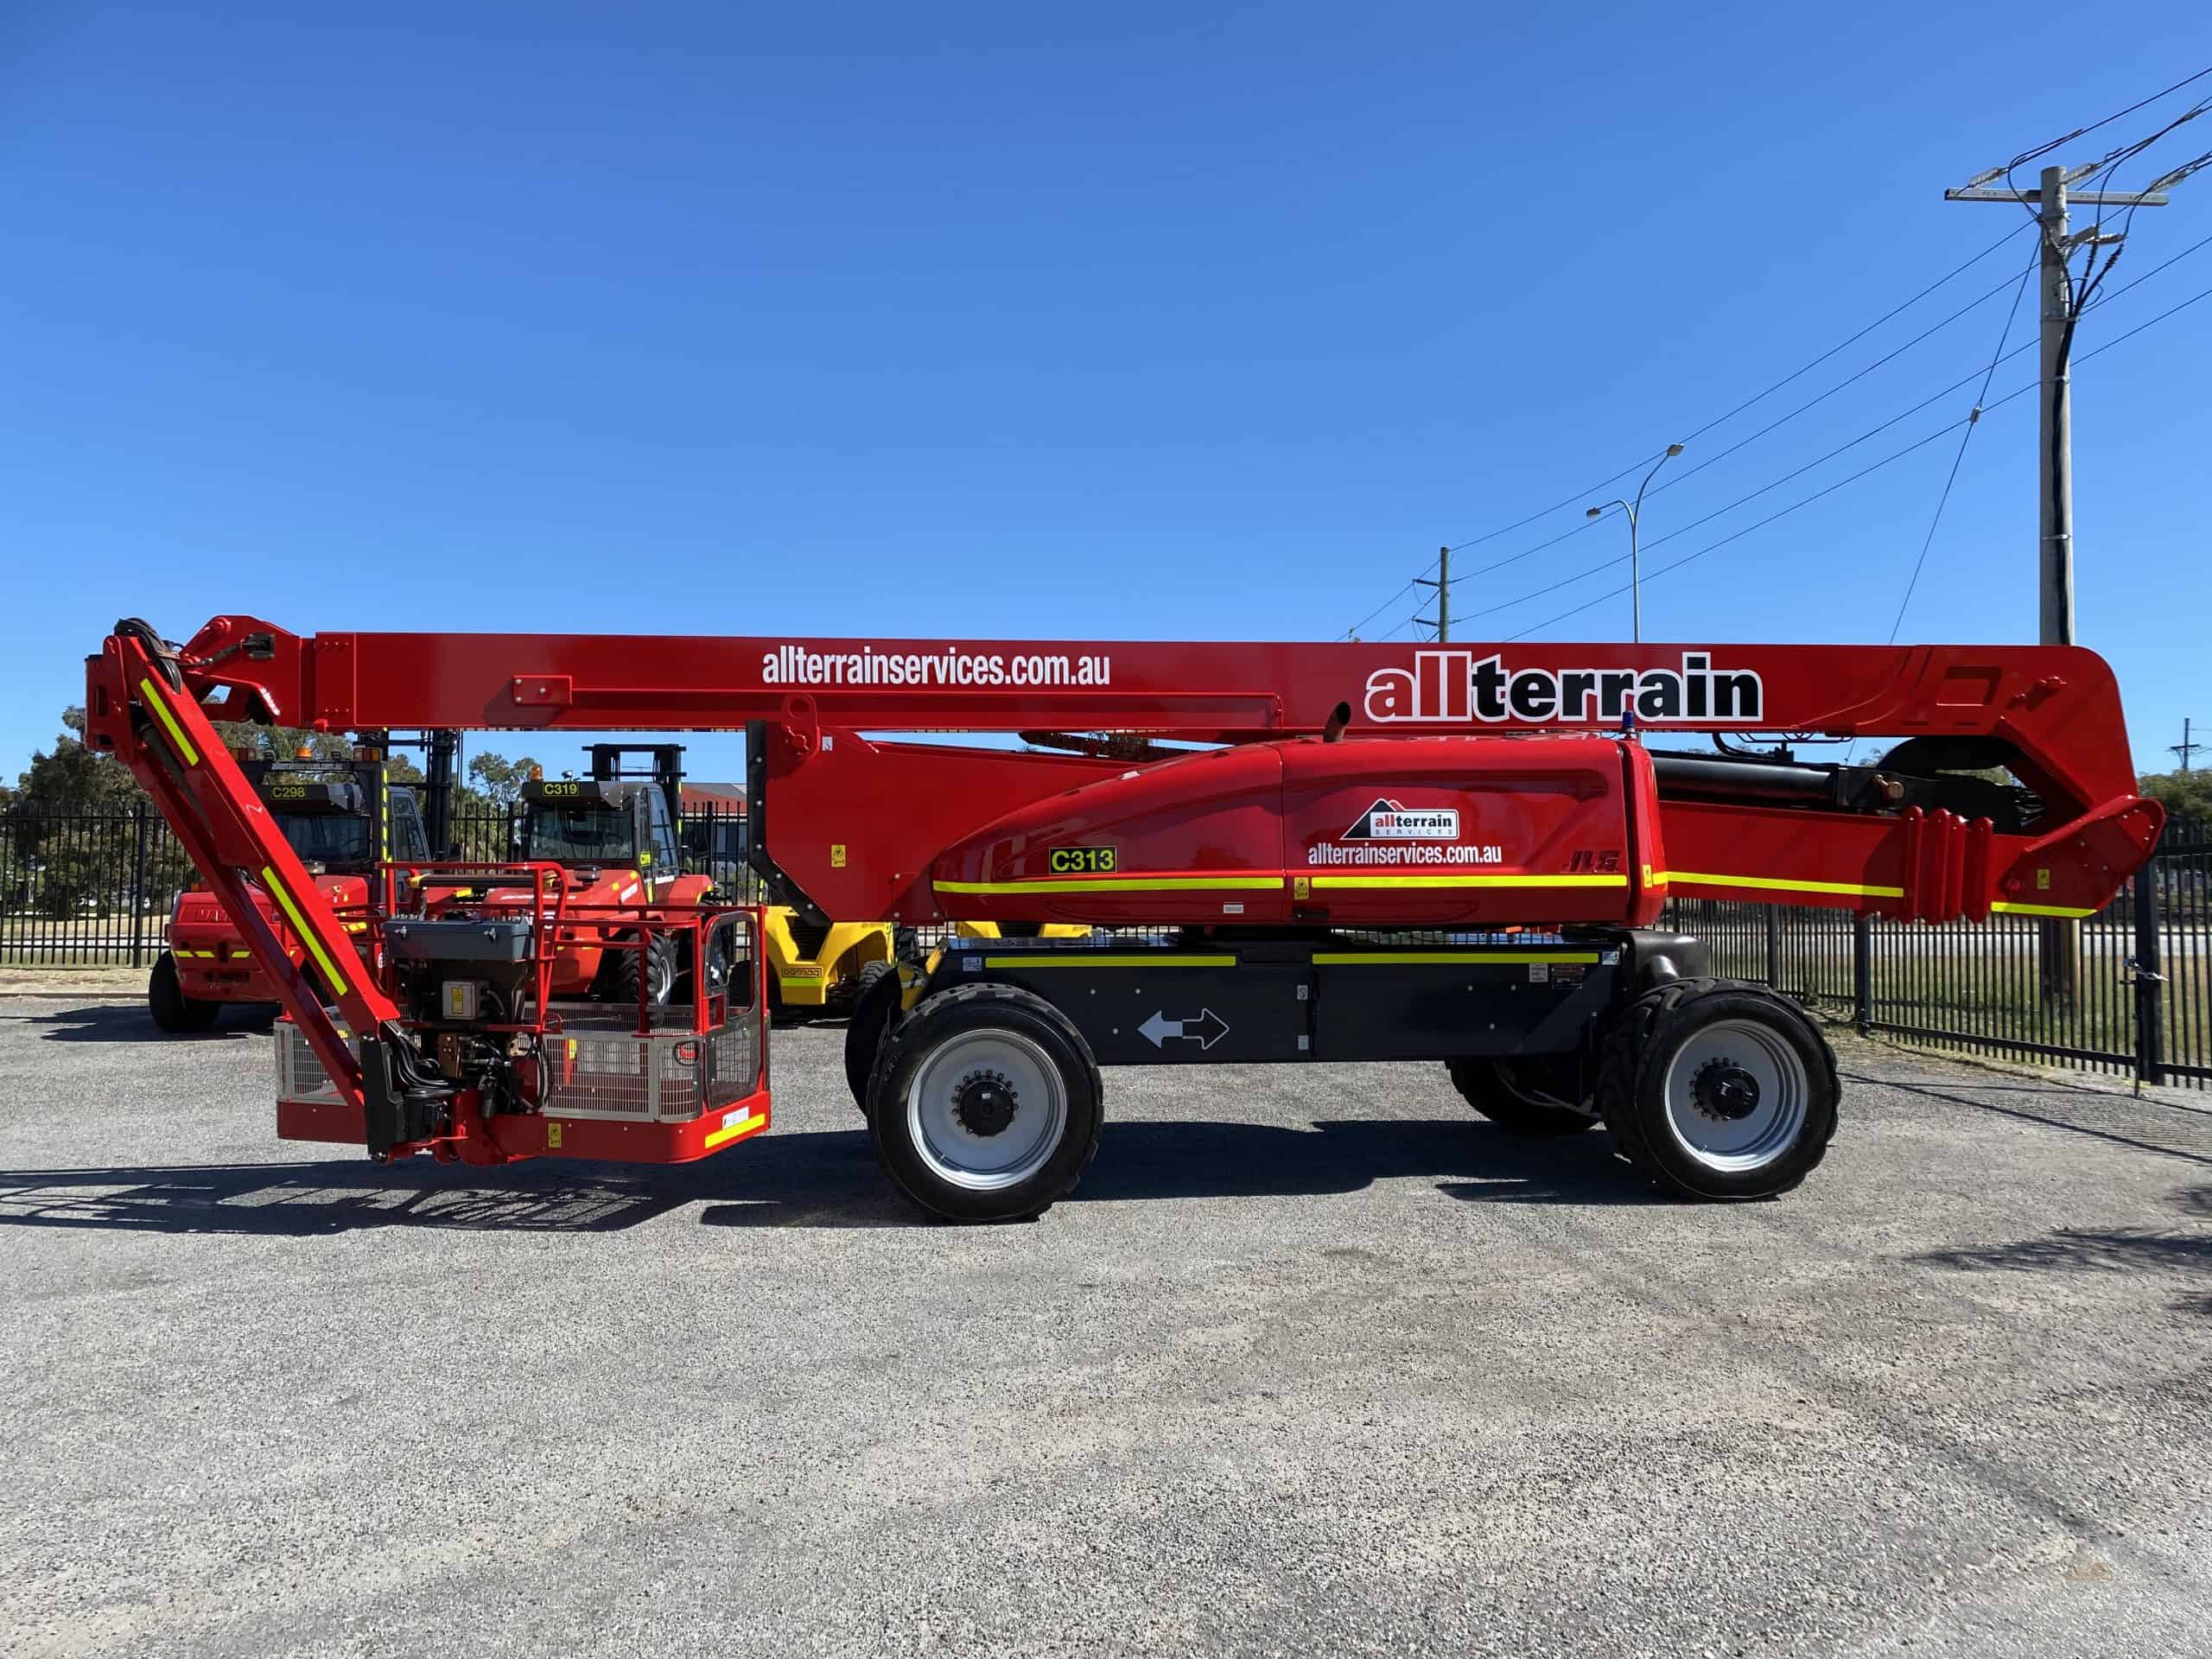 JLG 1250AJP Articulating Boom Lift for Hire in Perth